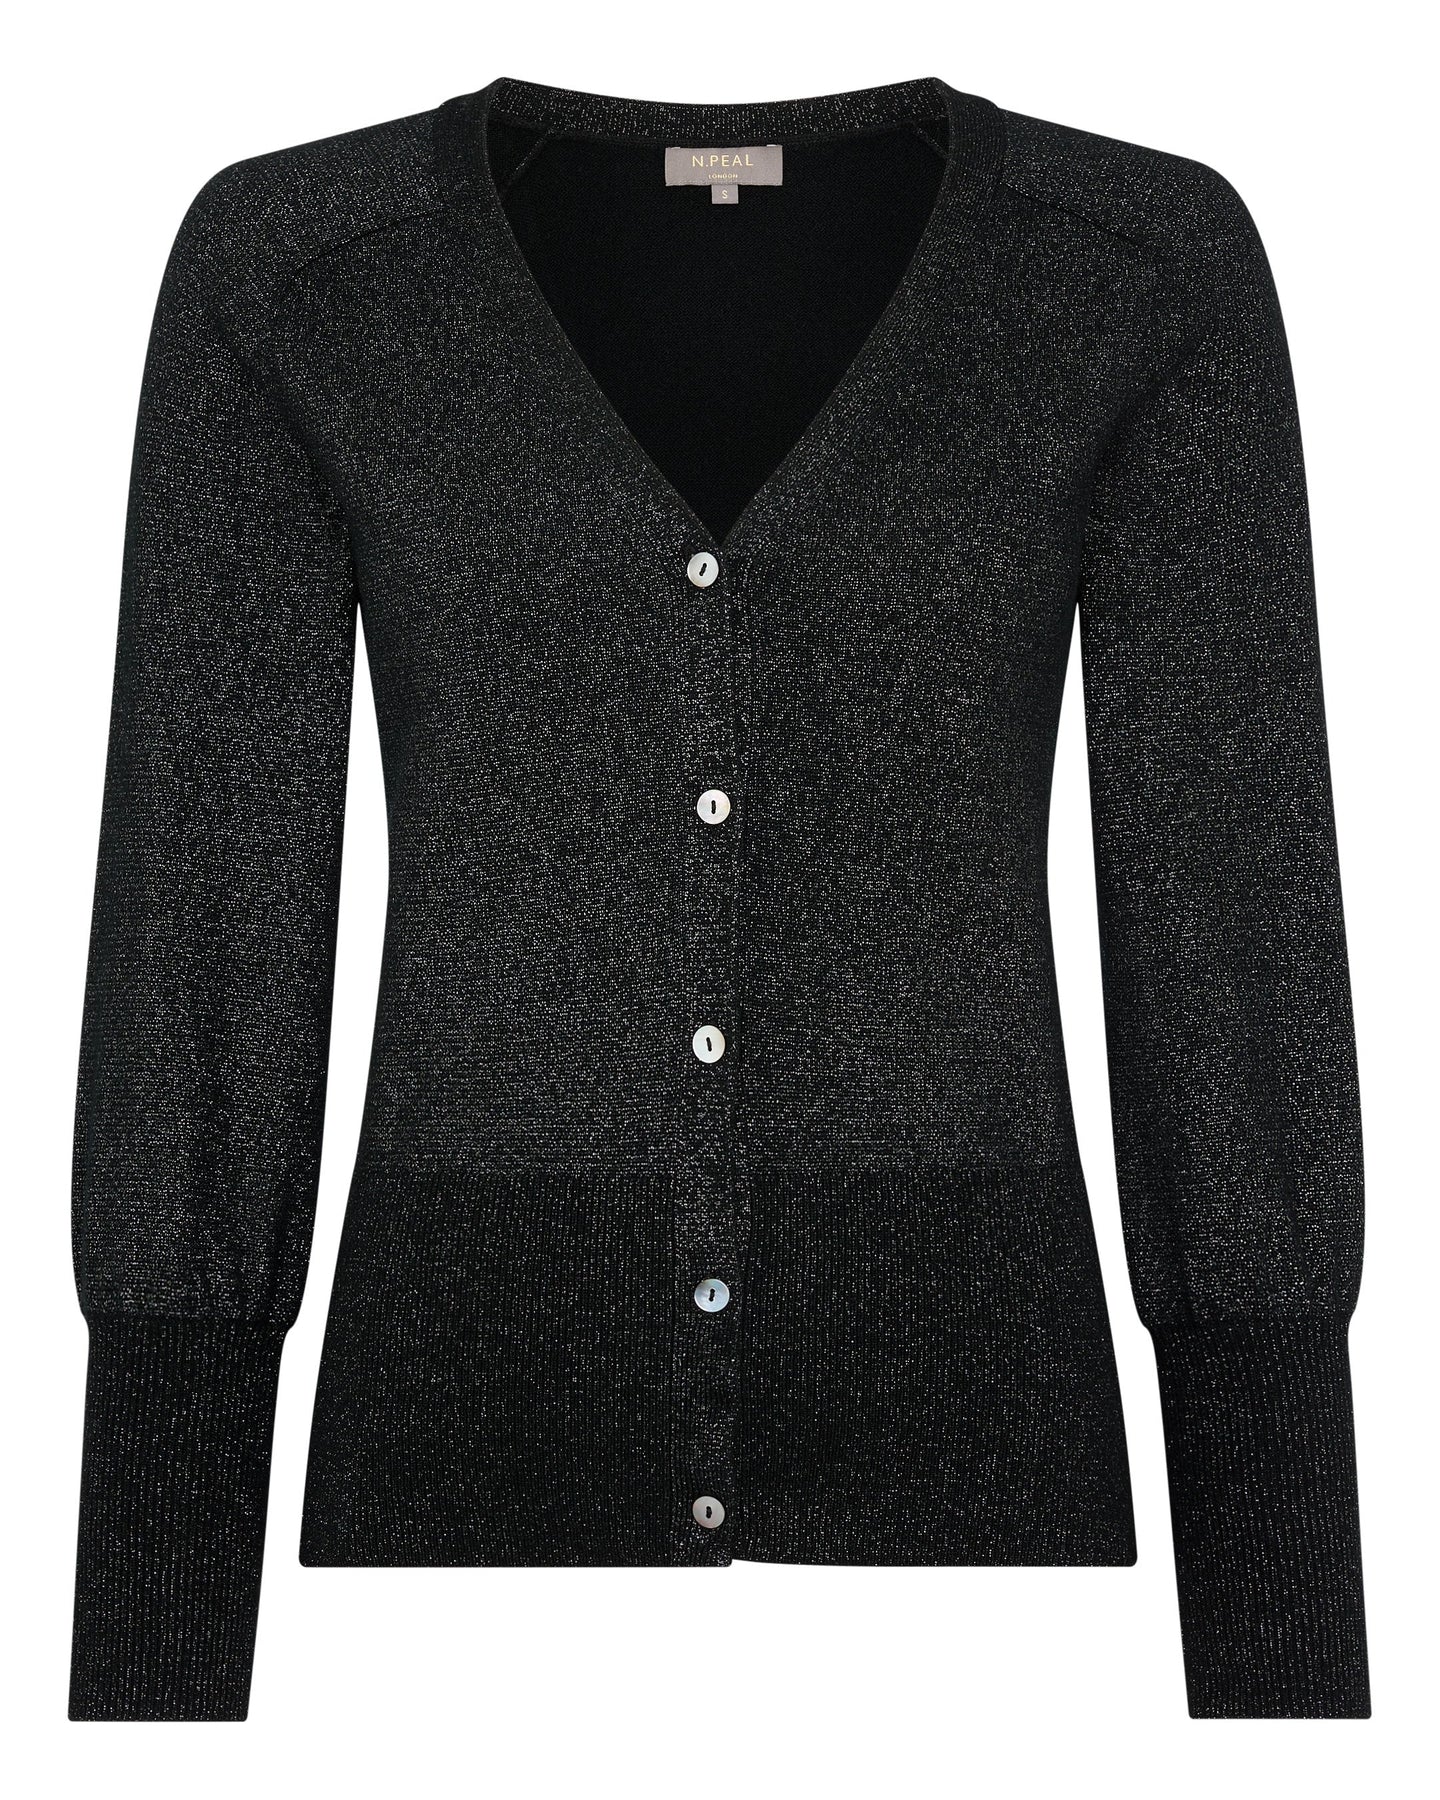 N.Peal Women's V Necked Cashmere Cardigan With Lurex Black Sparkle